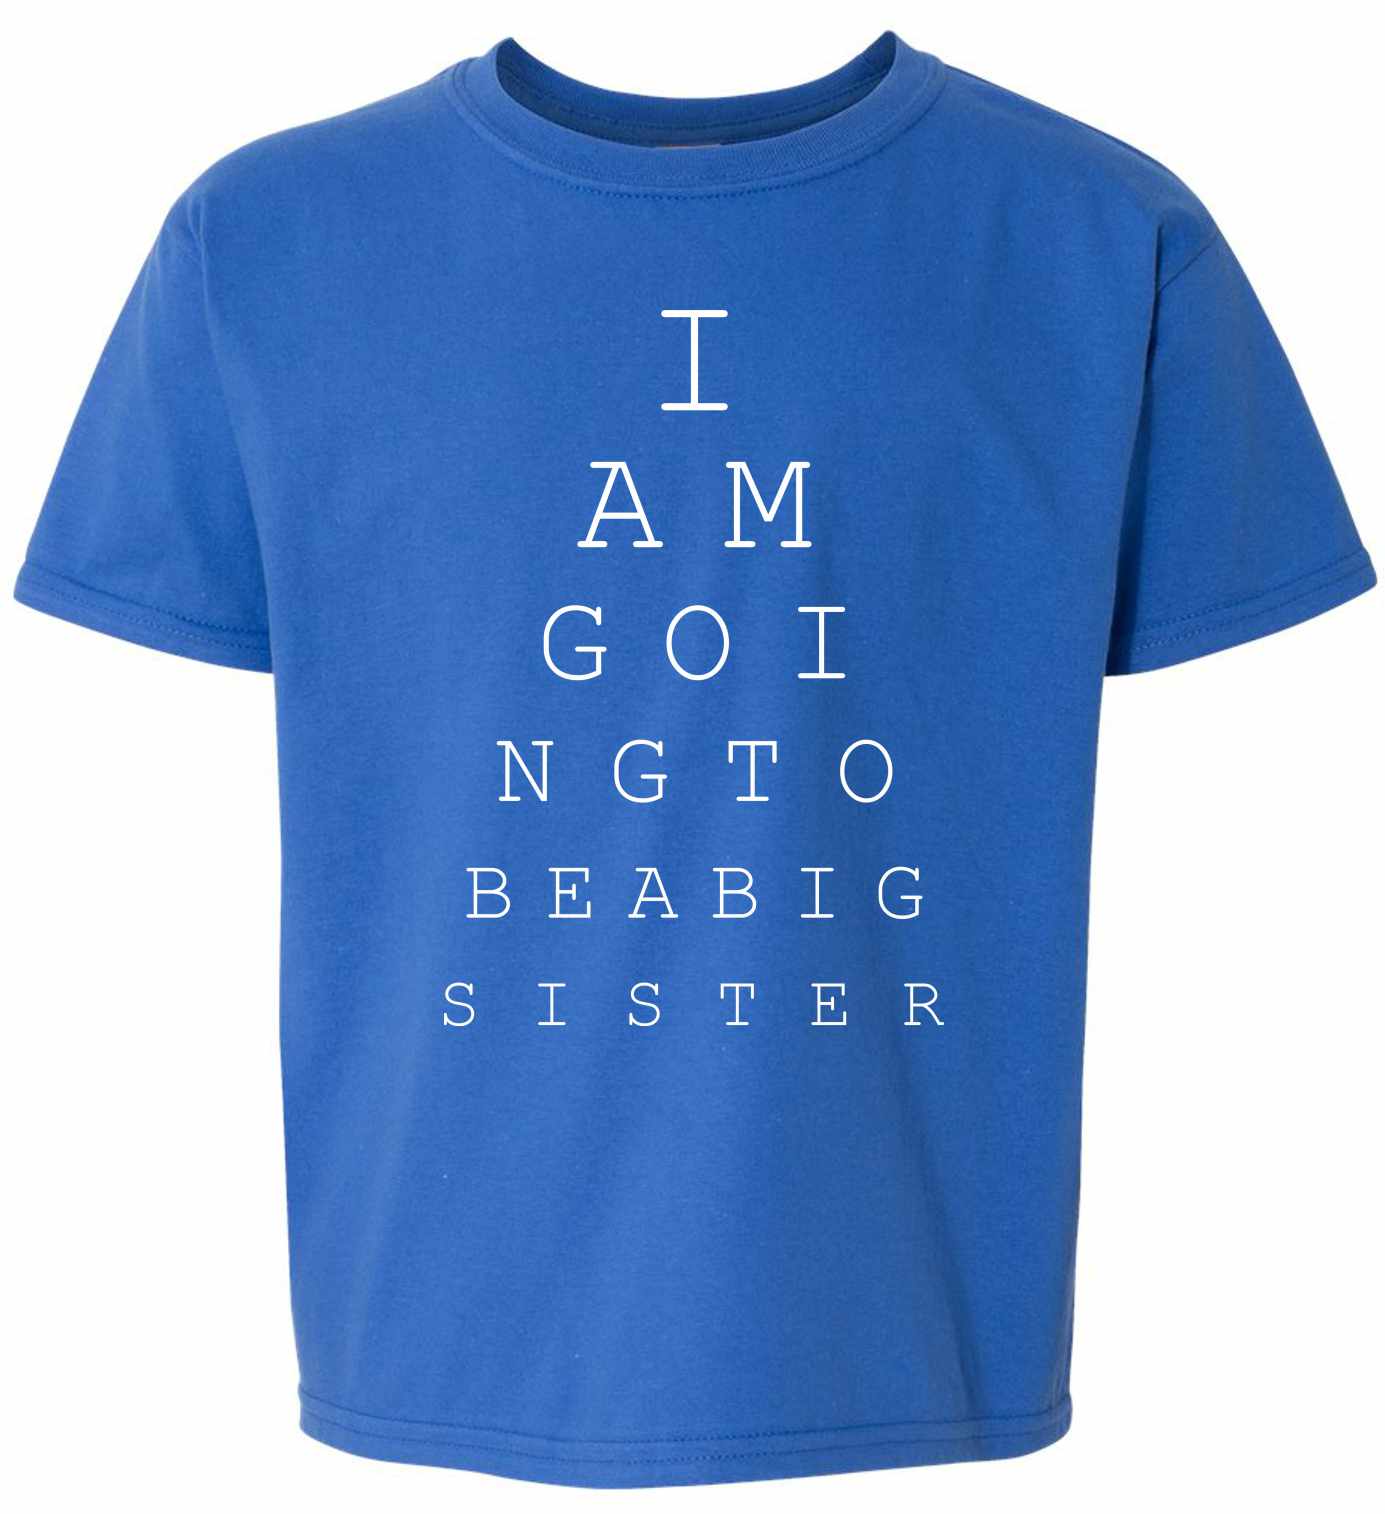 I AM GOING TO BE A BIG SISTER EYE CHART on Kids T-Shirt (#1160-201)